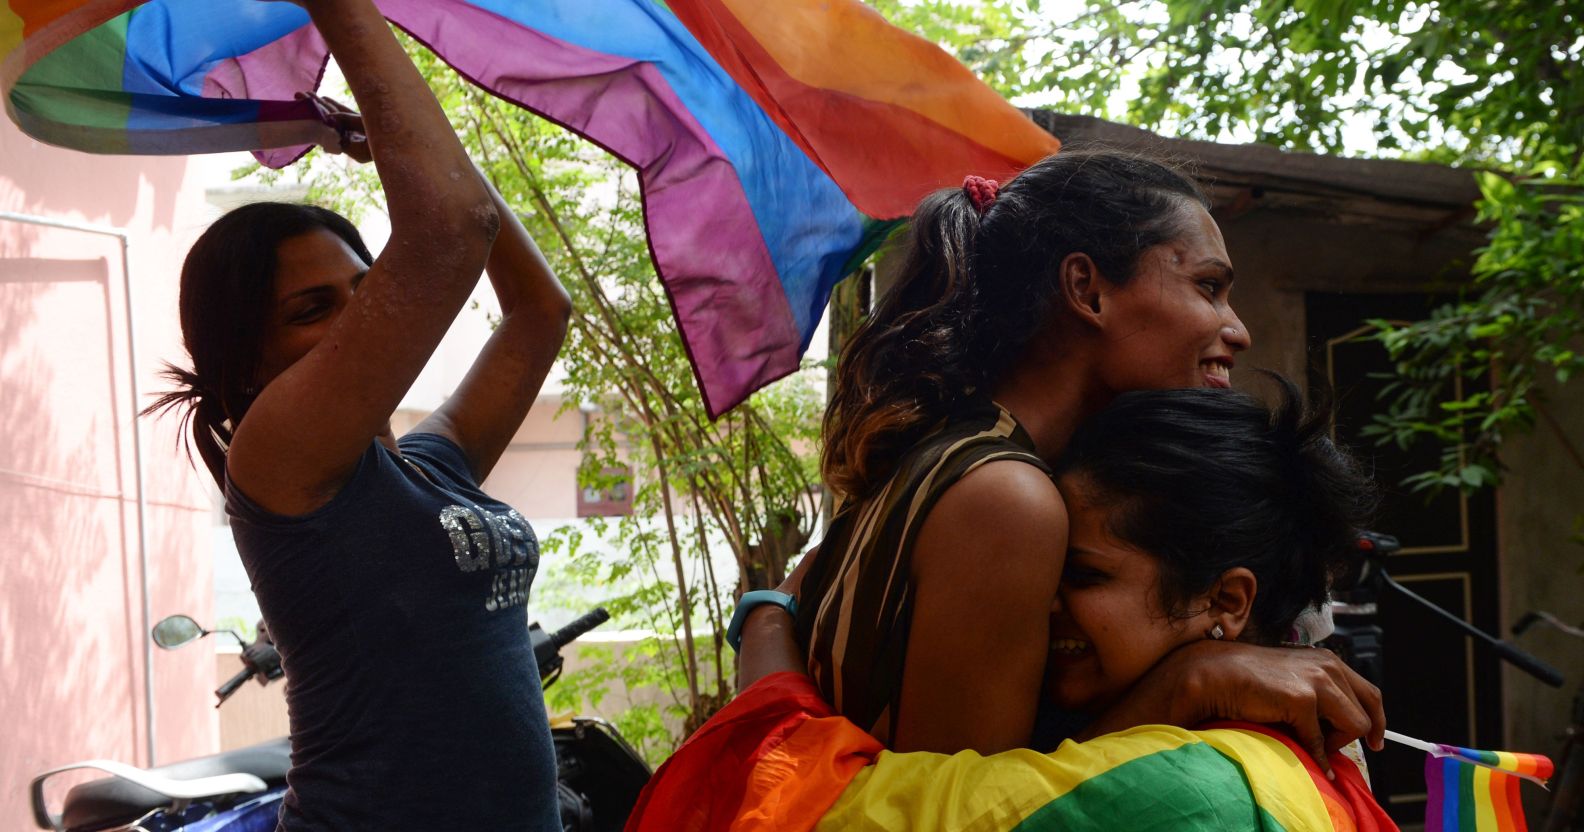 Indian members and supporters of the lesbian, gay, bisexual, transgender (LGBT) community celebrate the Supreme Court decision to strike down a colonial-era ban on gay sex, in Chennai on September 6, 2018. - India's Supreme Court on September 6 struck down the ban that has been at the centre of years of legal battles. "The law had become a weapon for harassment for the LGBT community," Chief Justice Dipak Misra said as he announced the landmark verdict. (Photo by ARUN SANKAR / AFP) (Photo credit should read ARUN SANKAR/AFP/Getty Images)